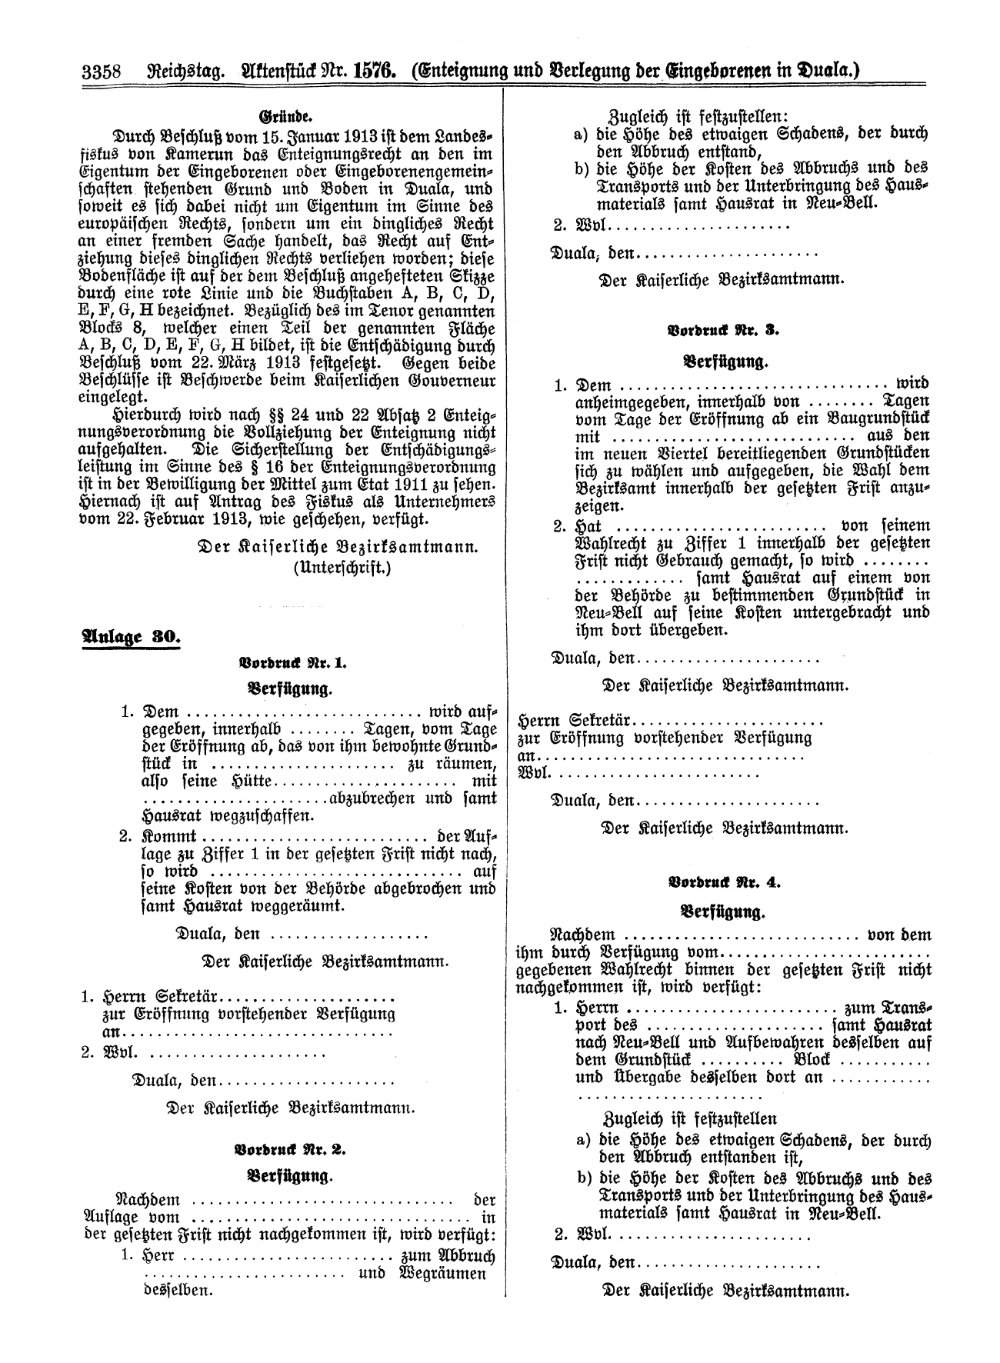 Scan of page 3358